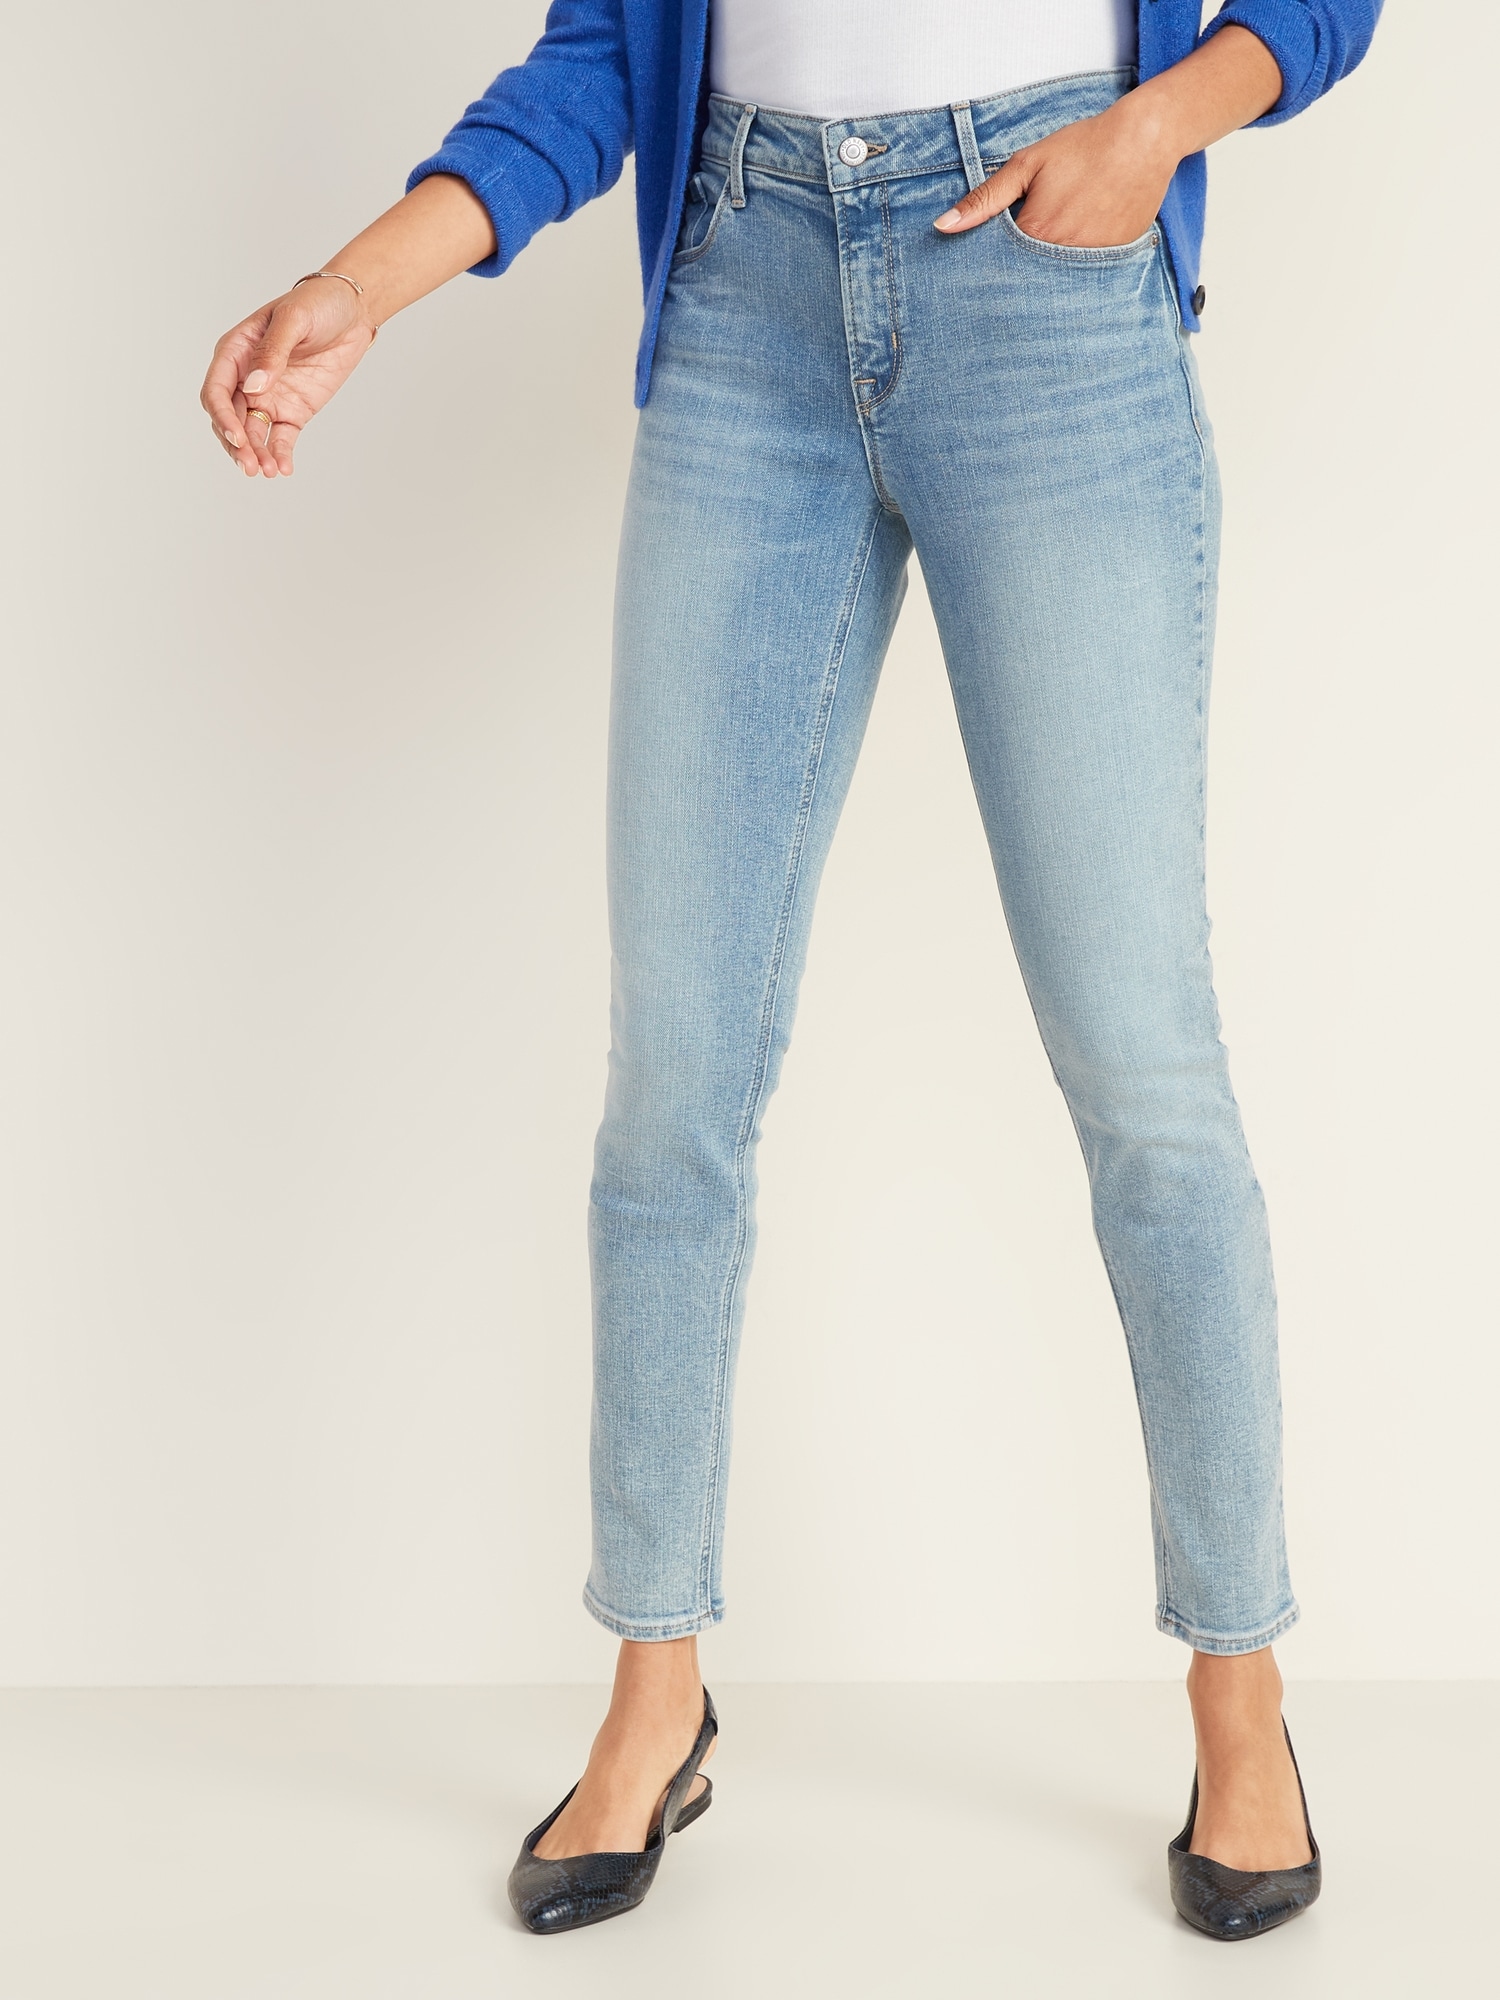 Women's Plus Size Skinny Jeans Old Navy, 50% OFF